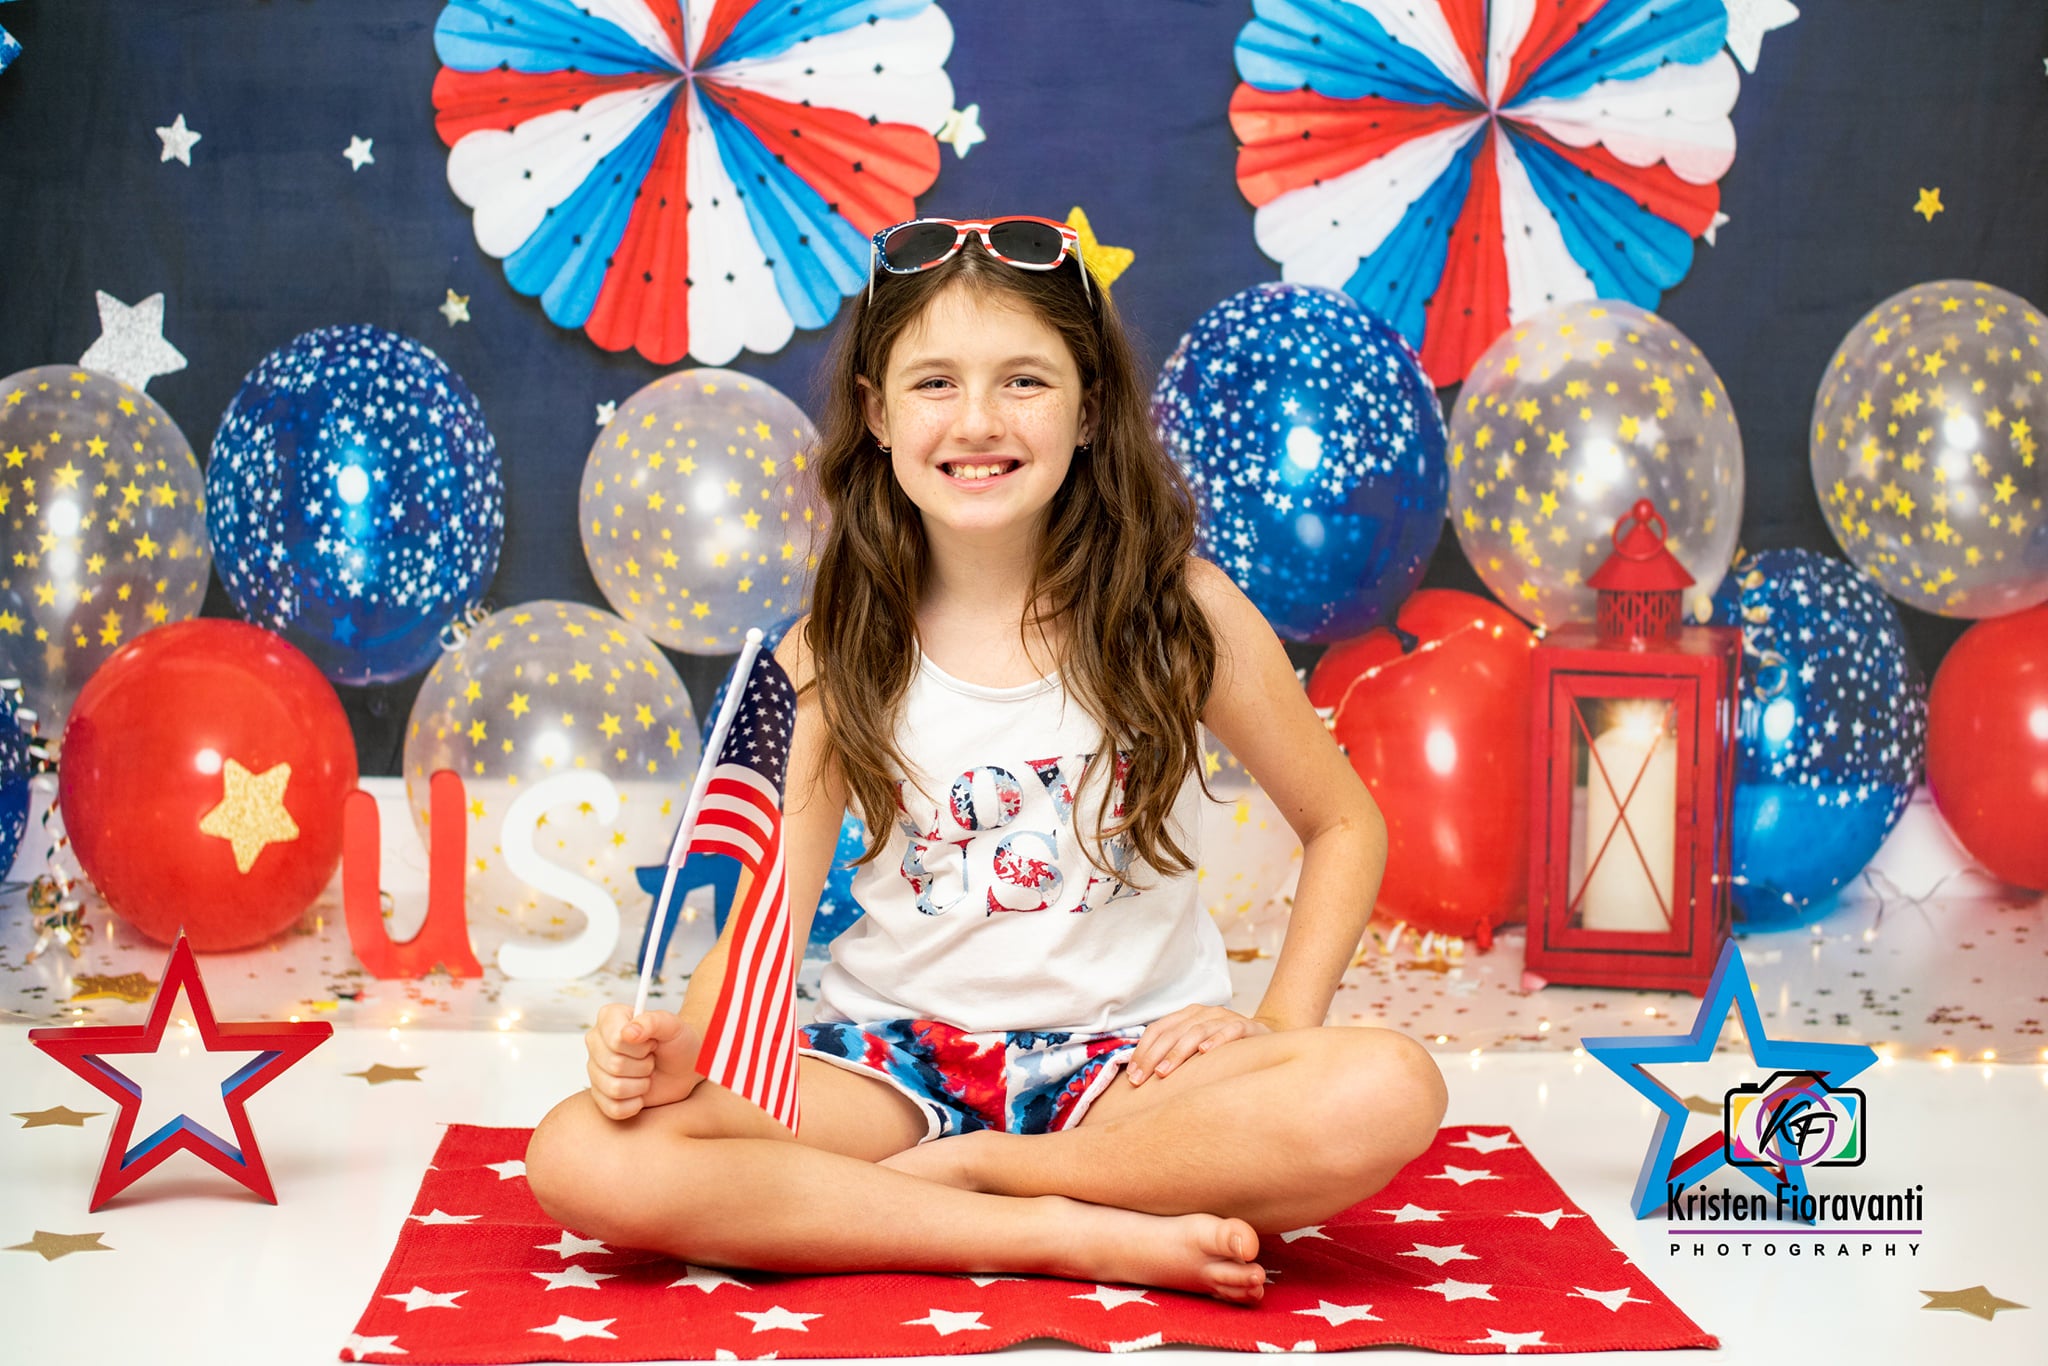 Kate USA Party July of 4th Backdrop for Photography Designed By Erin Larkins